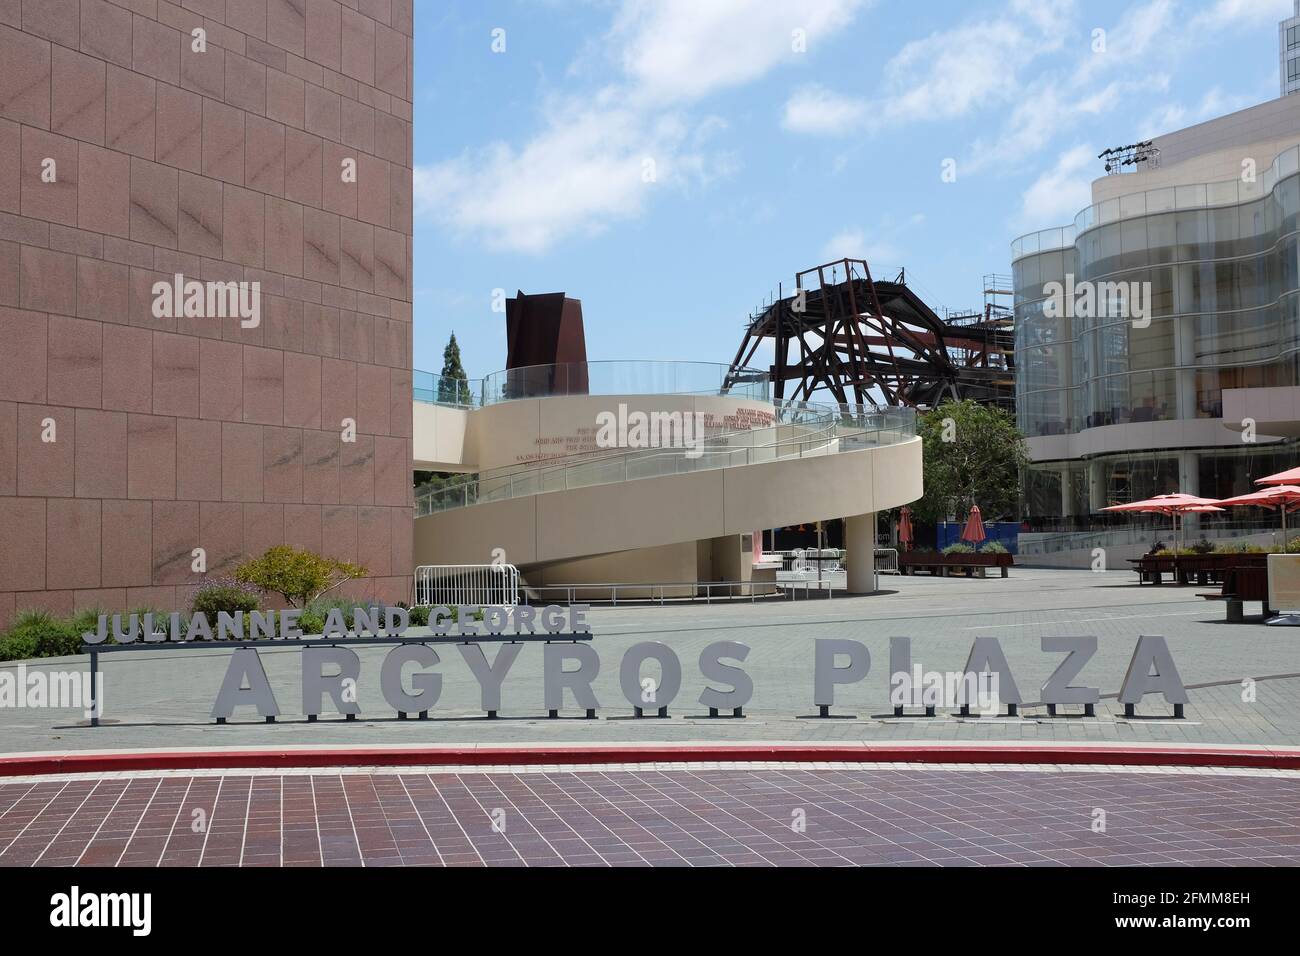 COSTA MESA, CALIFORNIA - 8 MAY 2021: The Argyros Plaza is a public gathering place that offers free events and performances, between Segerstrom Hall a Stock Photo